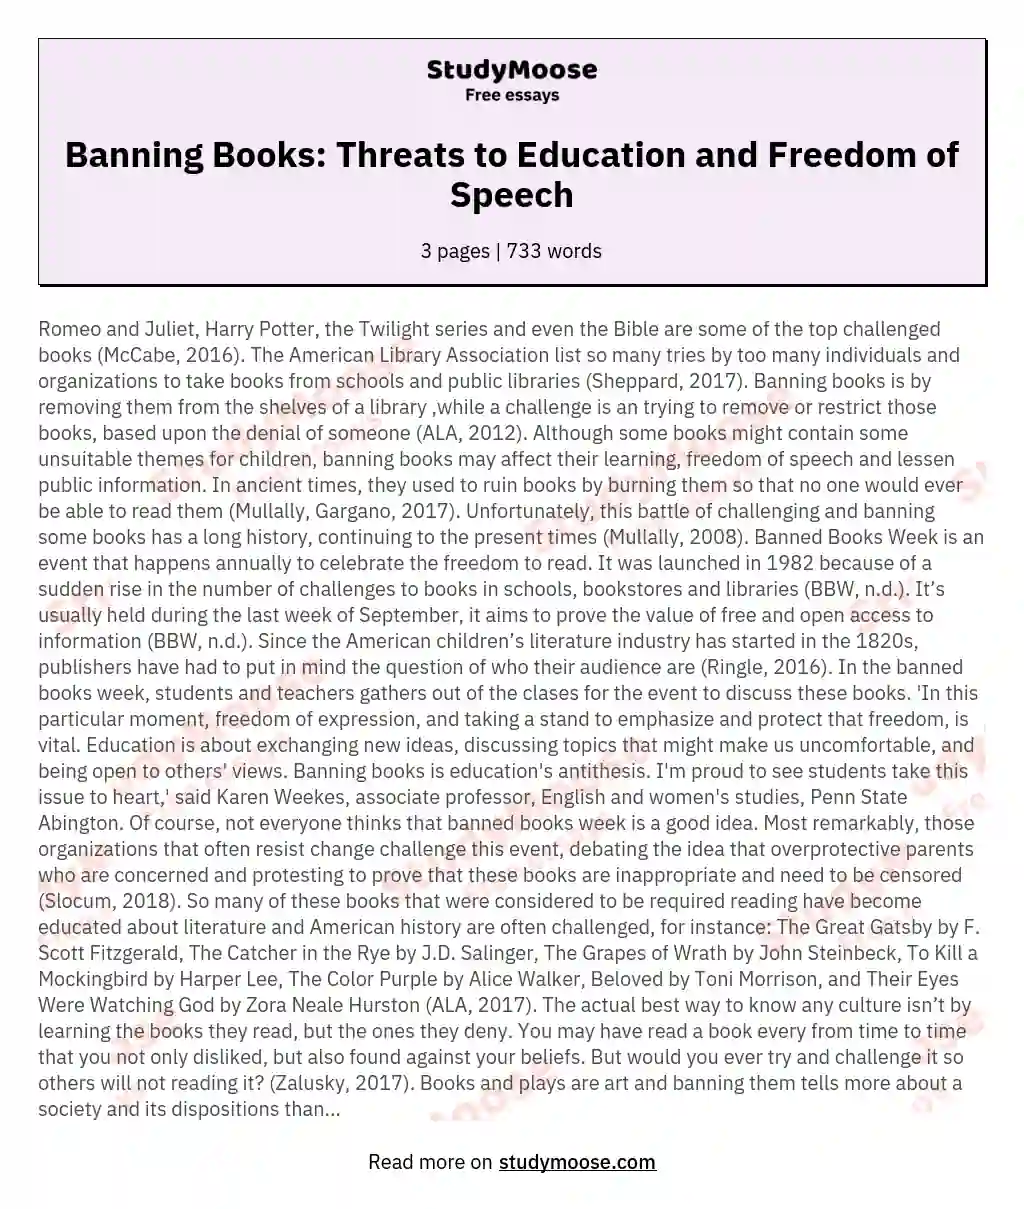 Banning Books: Threats to Education and Freedom of Speech essay